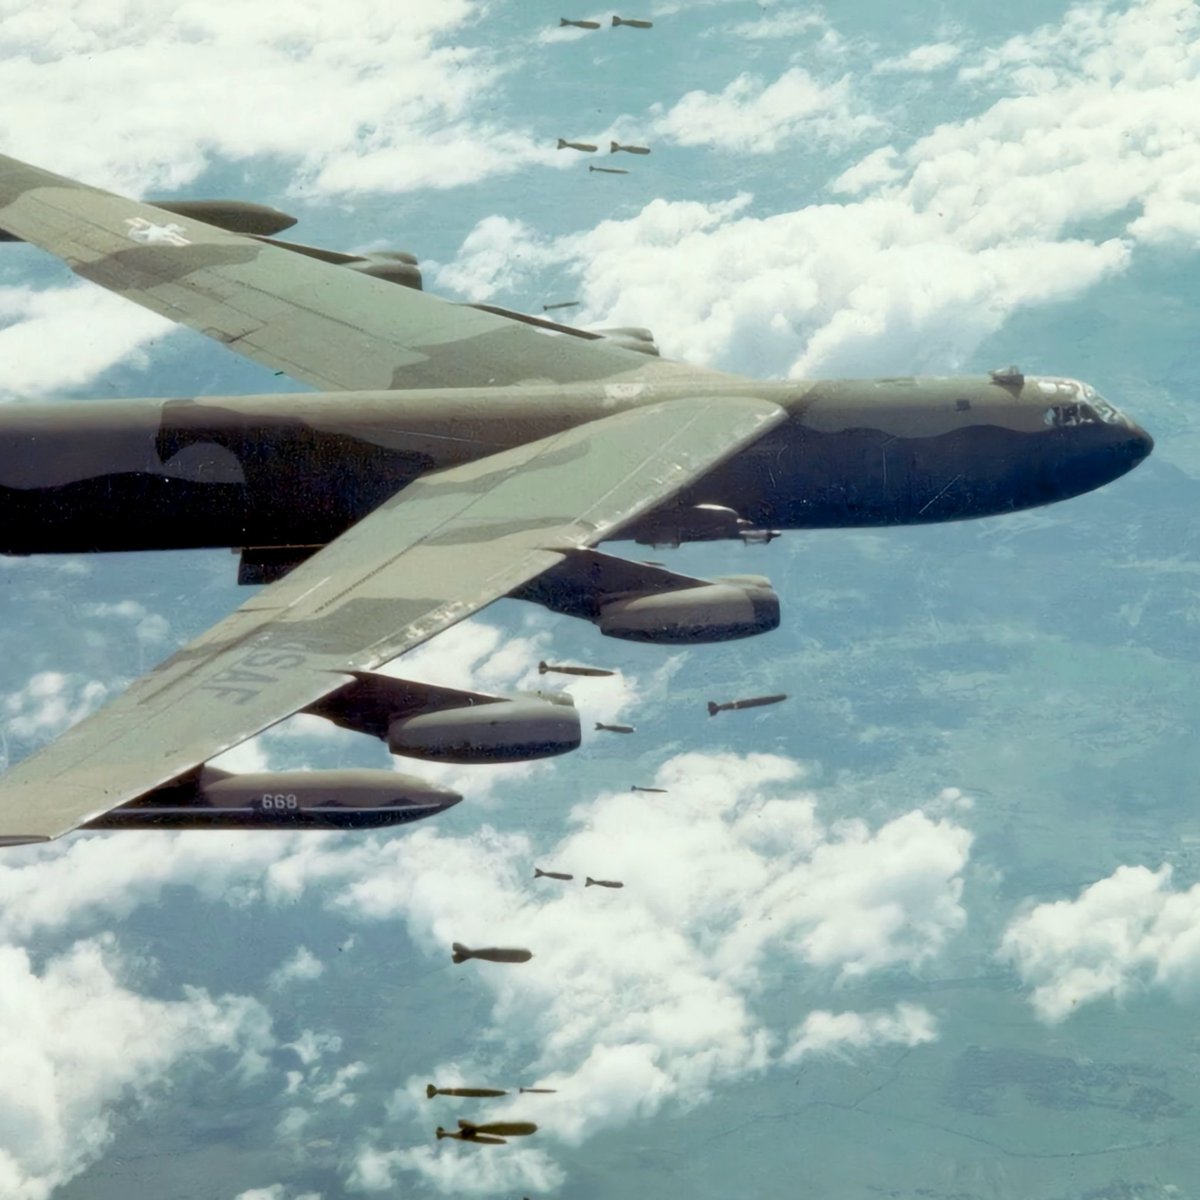 At one stage during the Vietnam War, the #USAF found itself out of bombs and had to repurchase 5,000 of them from West Germany, originally sold as scrap for $8,500. The cost to reclaim these bombs? A whopping $105,000! No kidding! 😀 #avgeeks #aviation #militaryspending #history